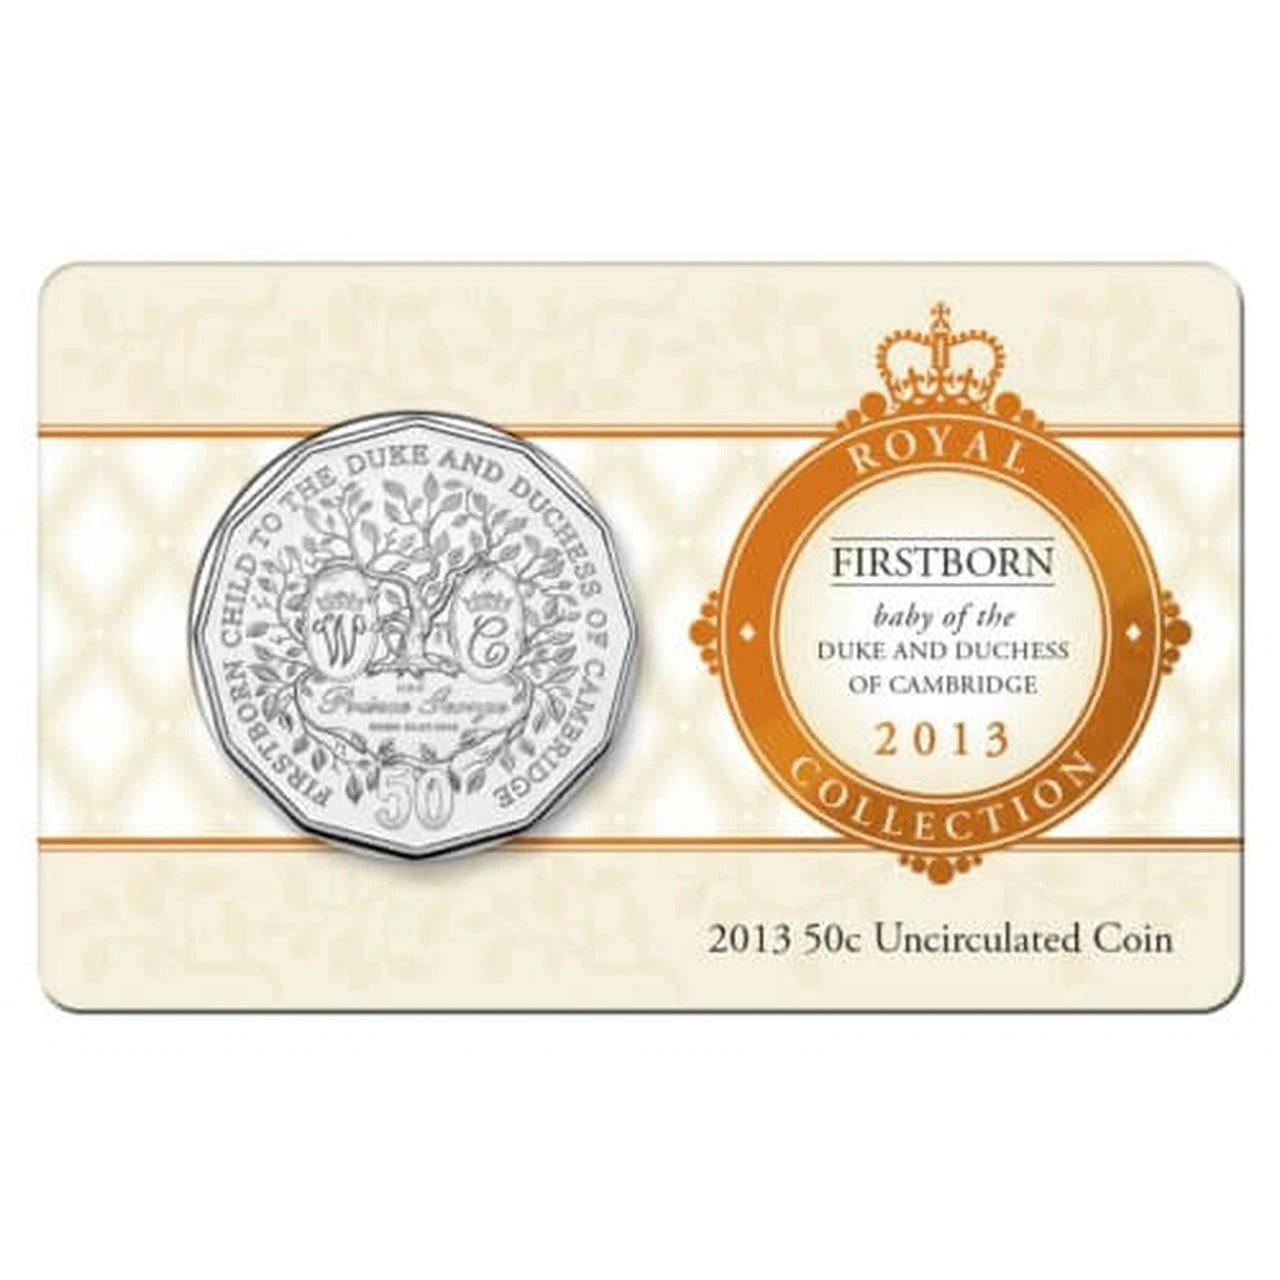 2013 Australian Fifty Cent Coin - Firstborn Baby of The Duke and Duchess of Cambridge - Royal Collection -HRH Prince George - Loose Change Coins